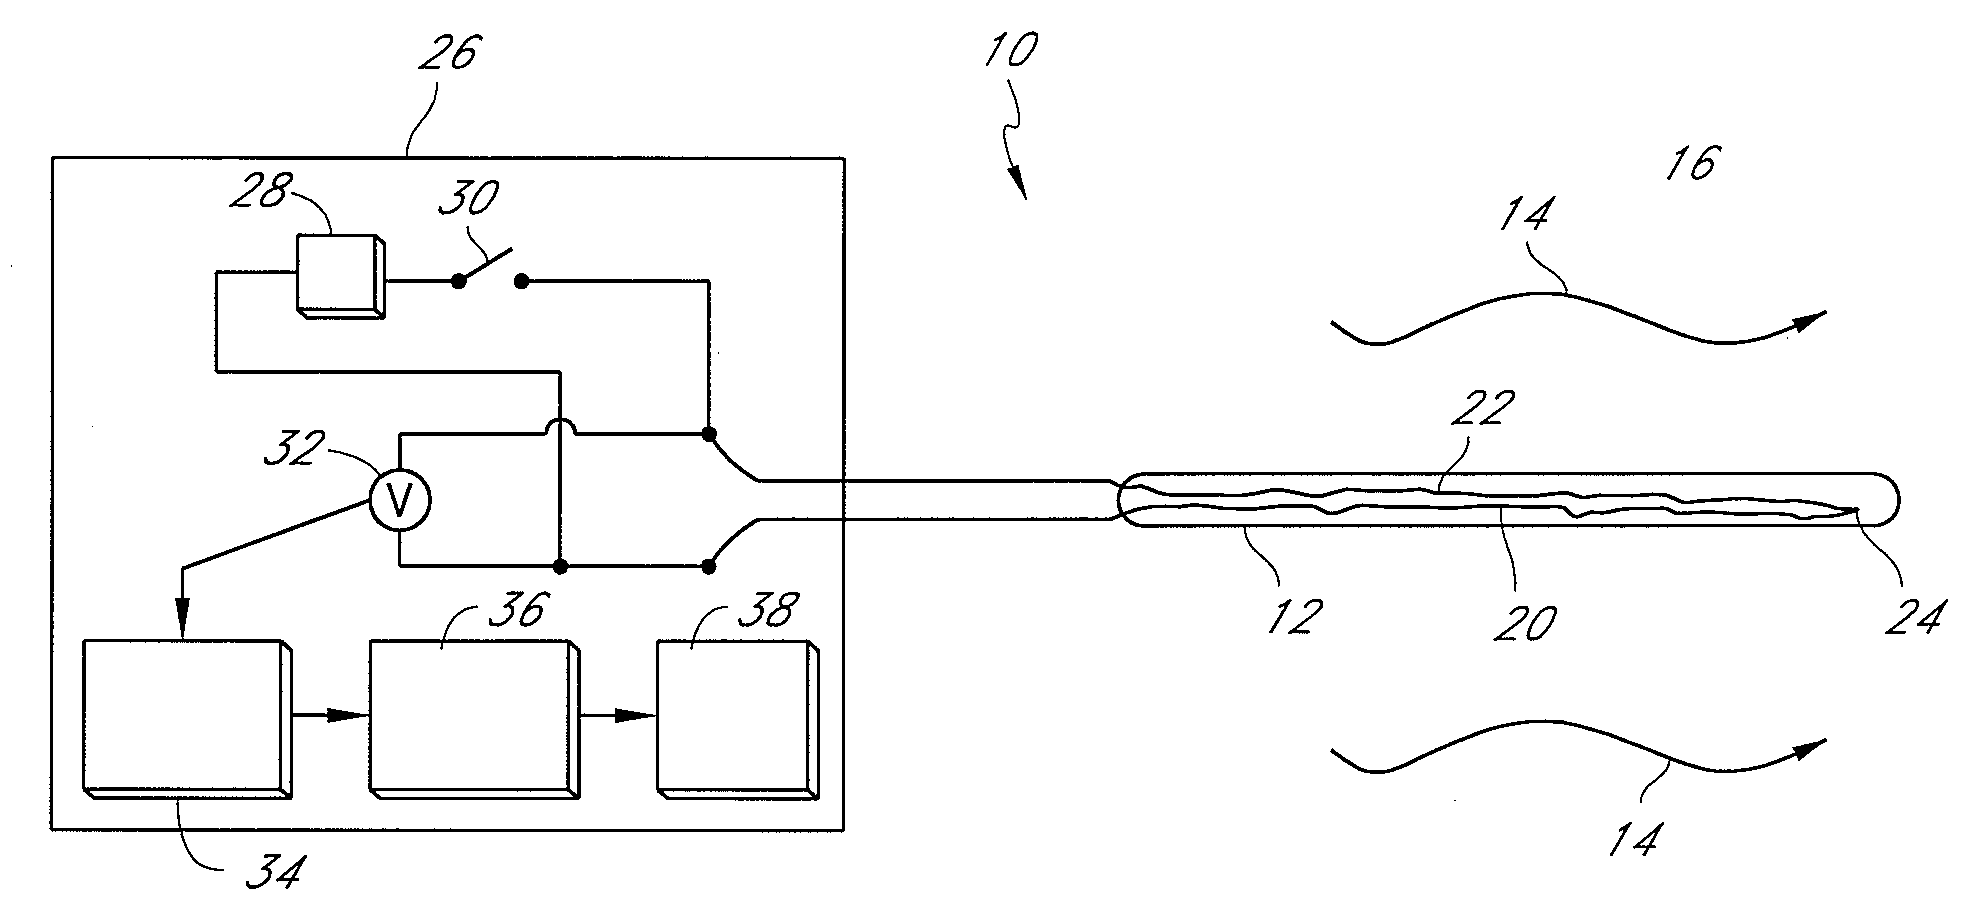 Device for measuring permeate flow and permeate conductivity of individual reverse osmosis membrane elements